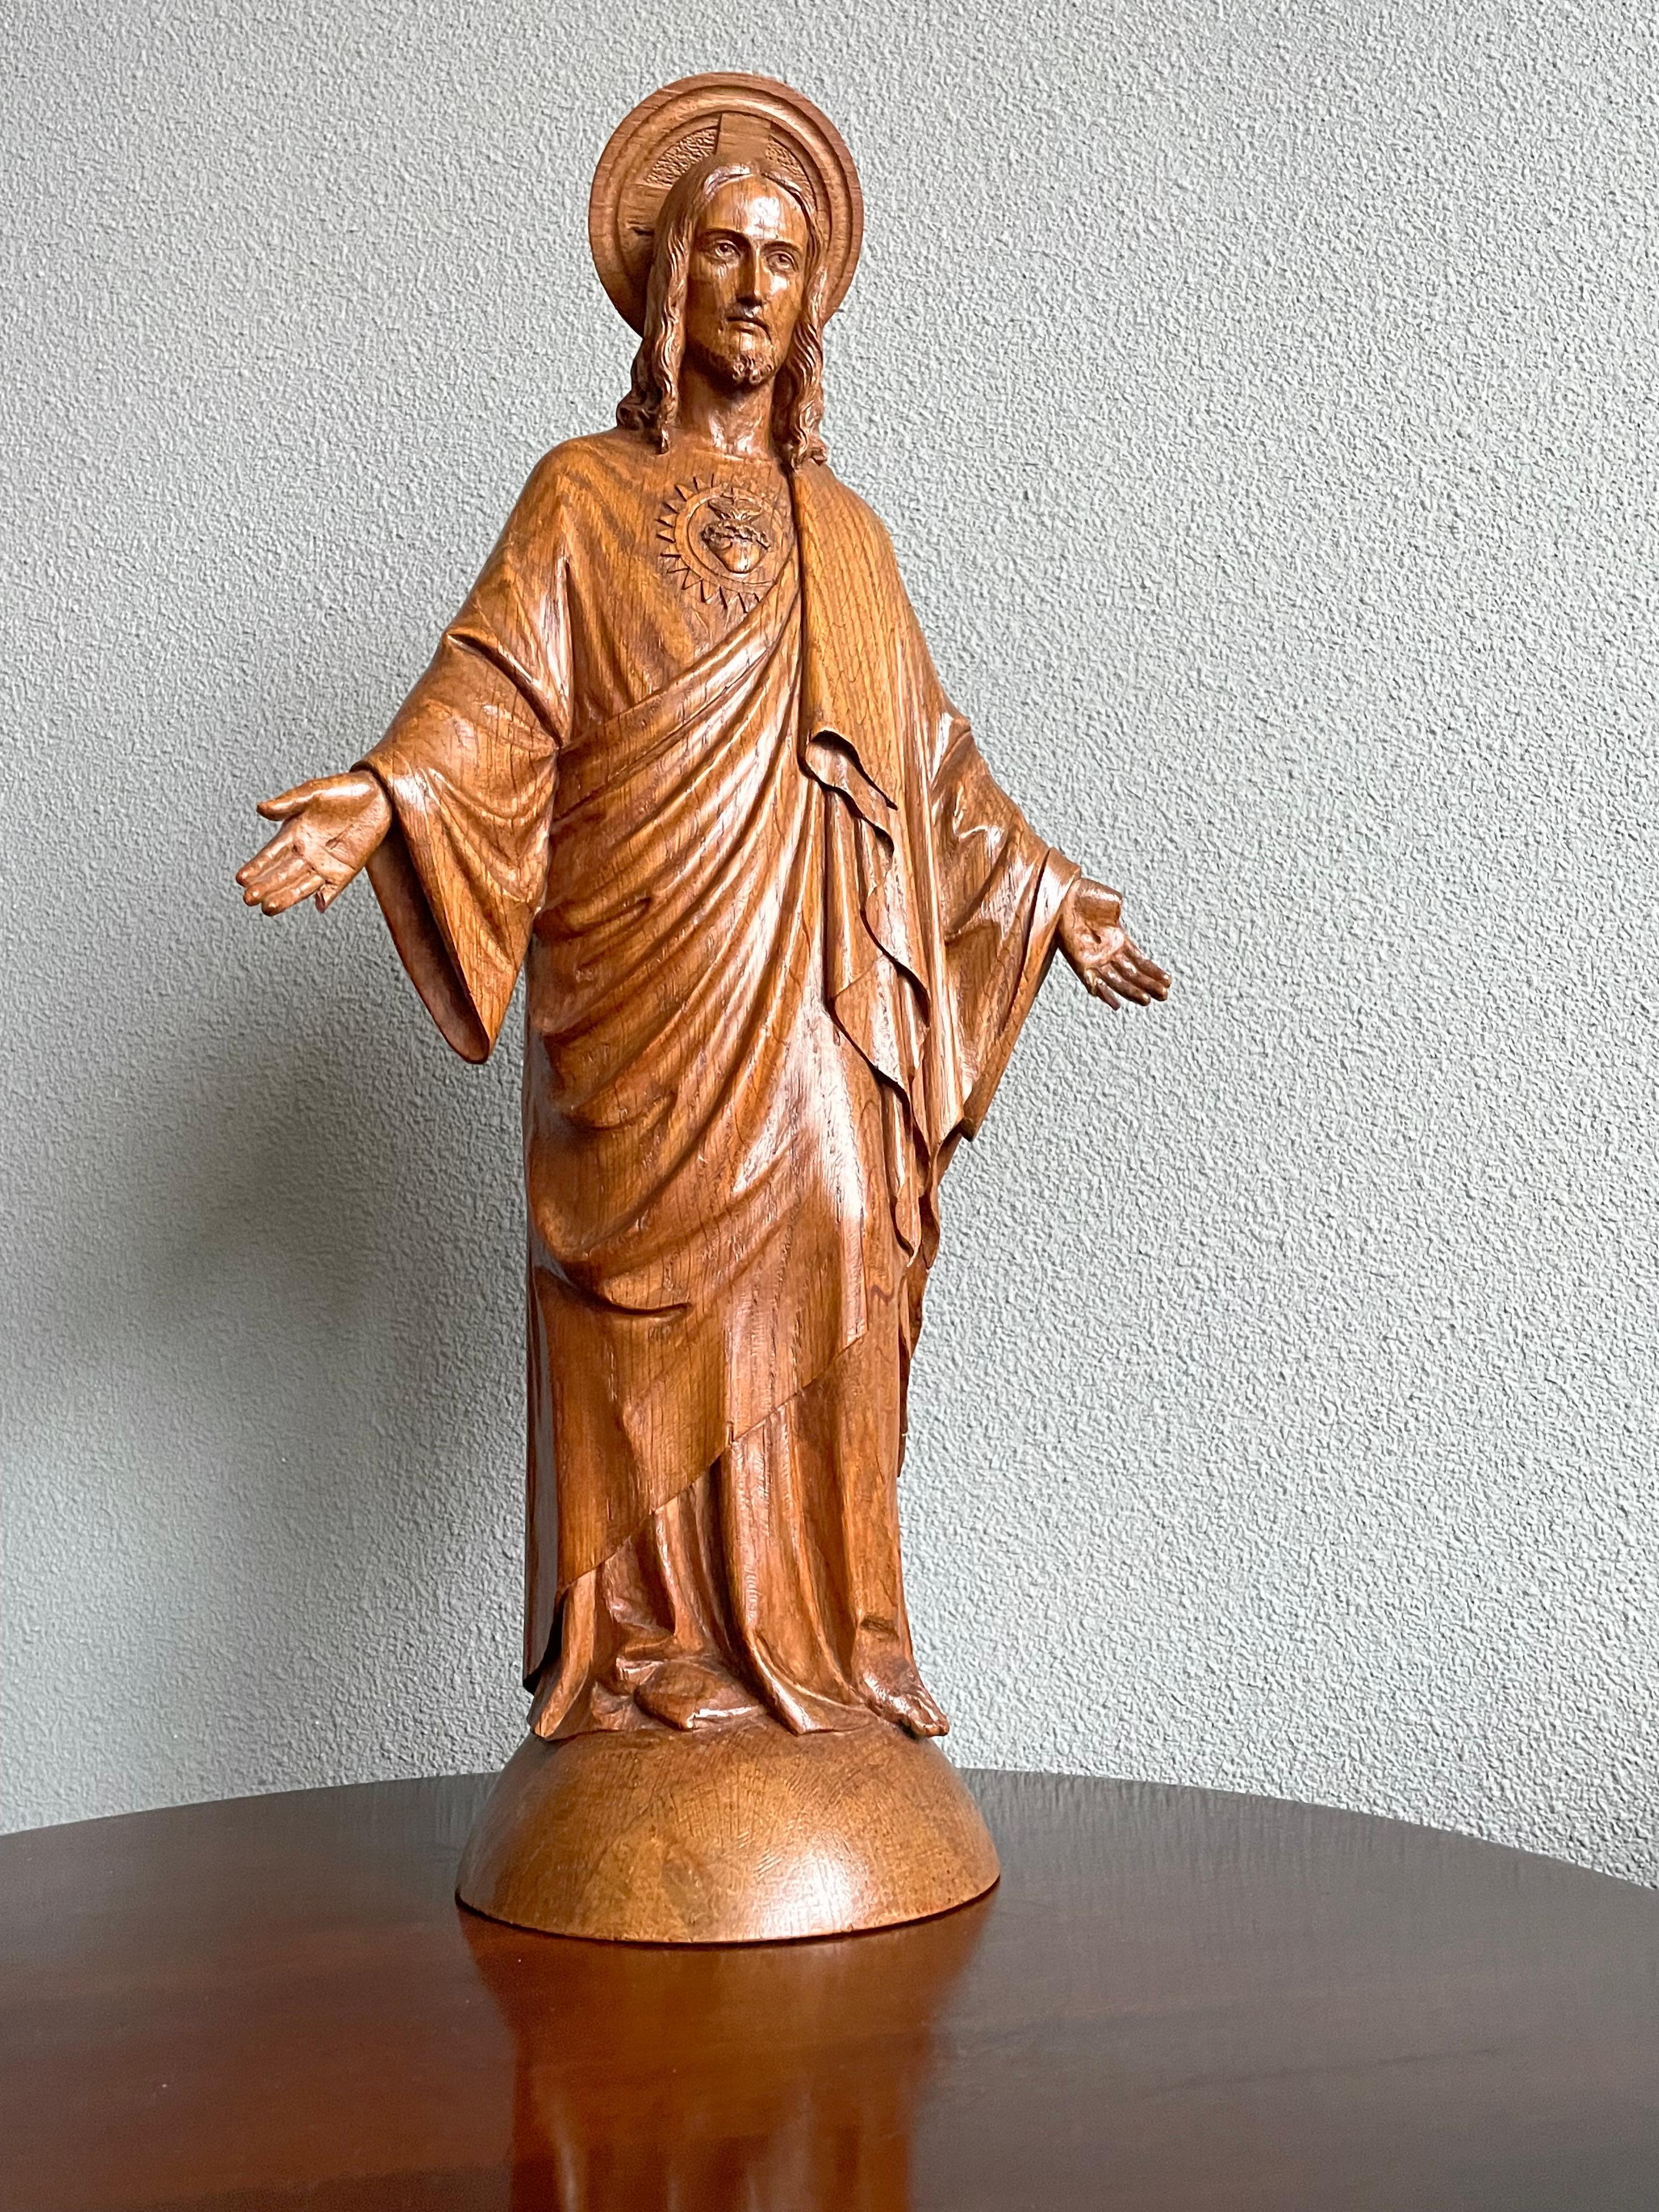 Striking, good size and meaningful work of religious art.

This beautifully hand carved and good size Sacred Heart of Christ statue is another recent great find. In our view the sculptor has perfectly managed to capture both the wisdom and